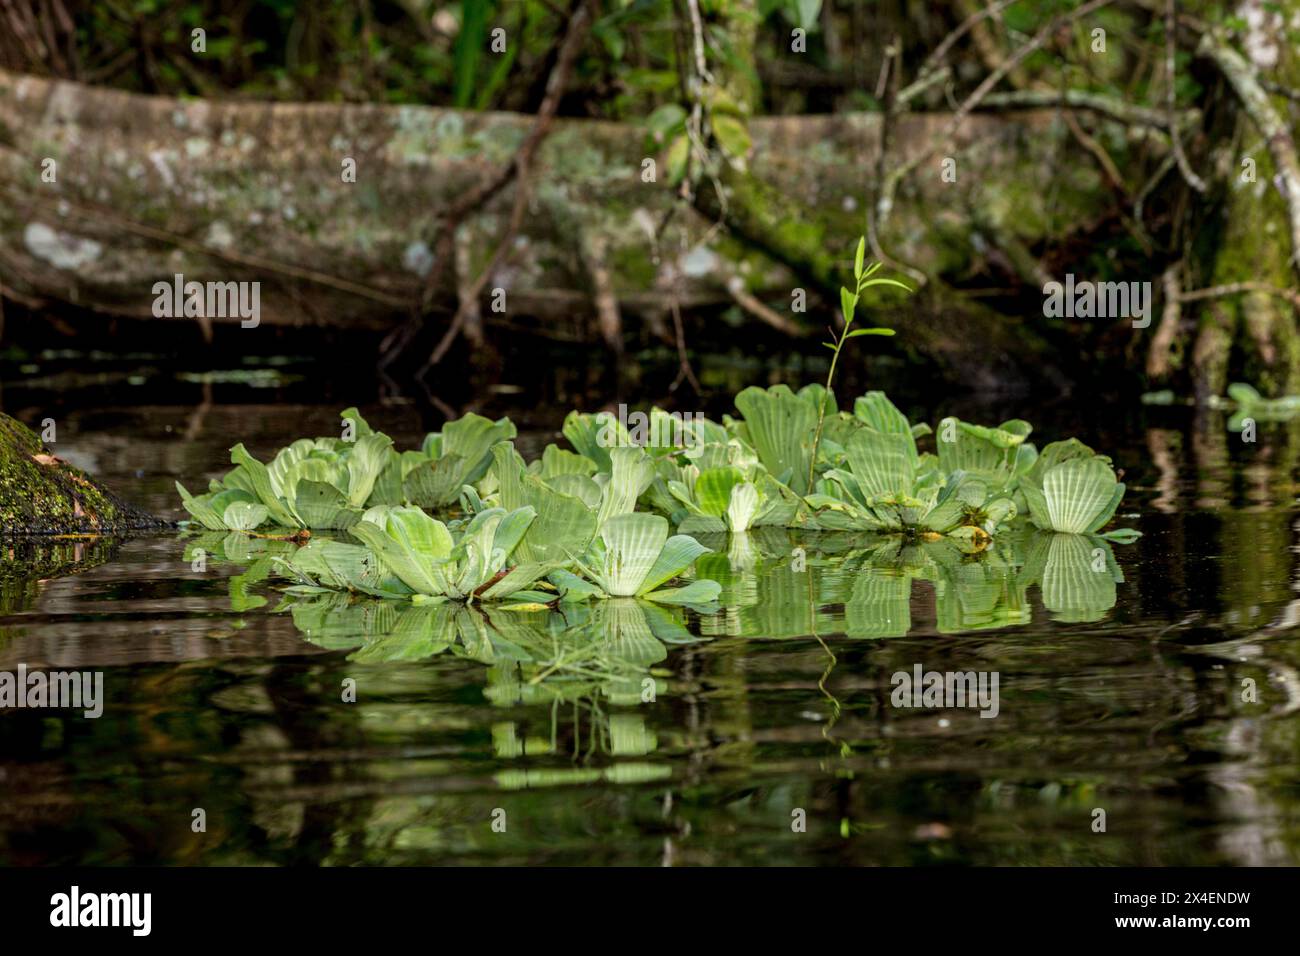 Water lettuce is a common floating plant in swamps of south Florida. Stock Photo